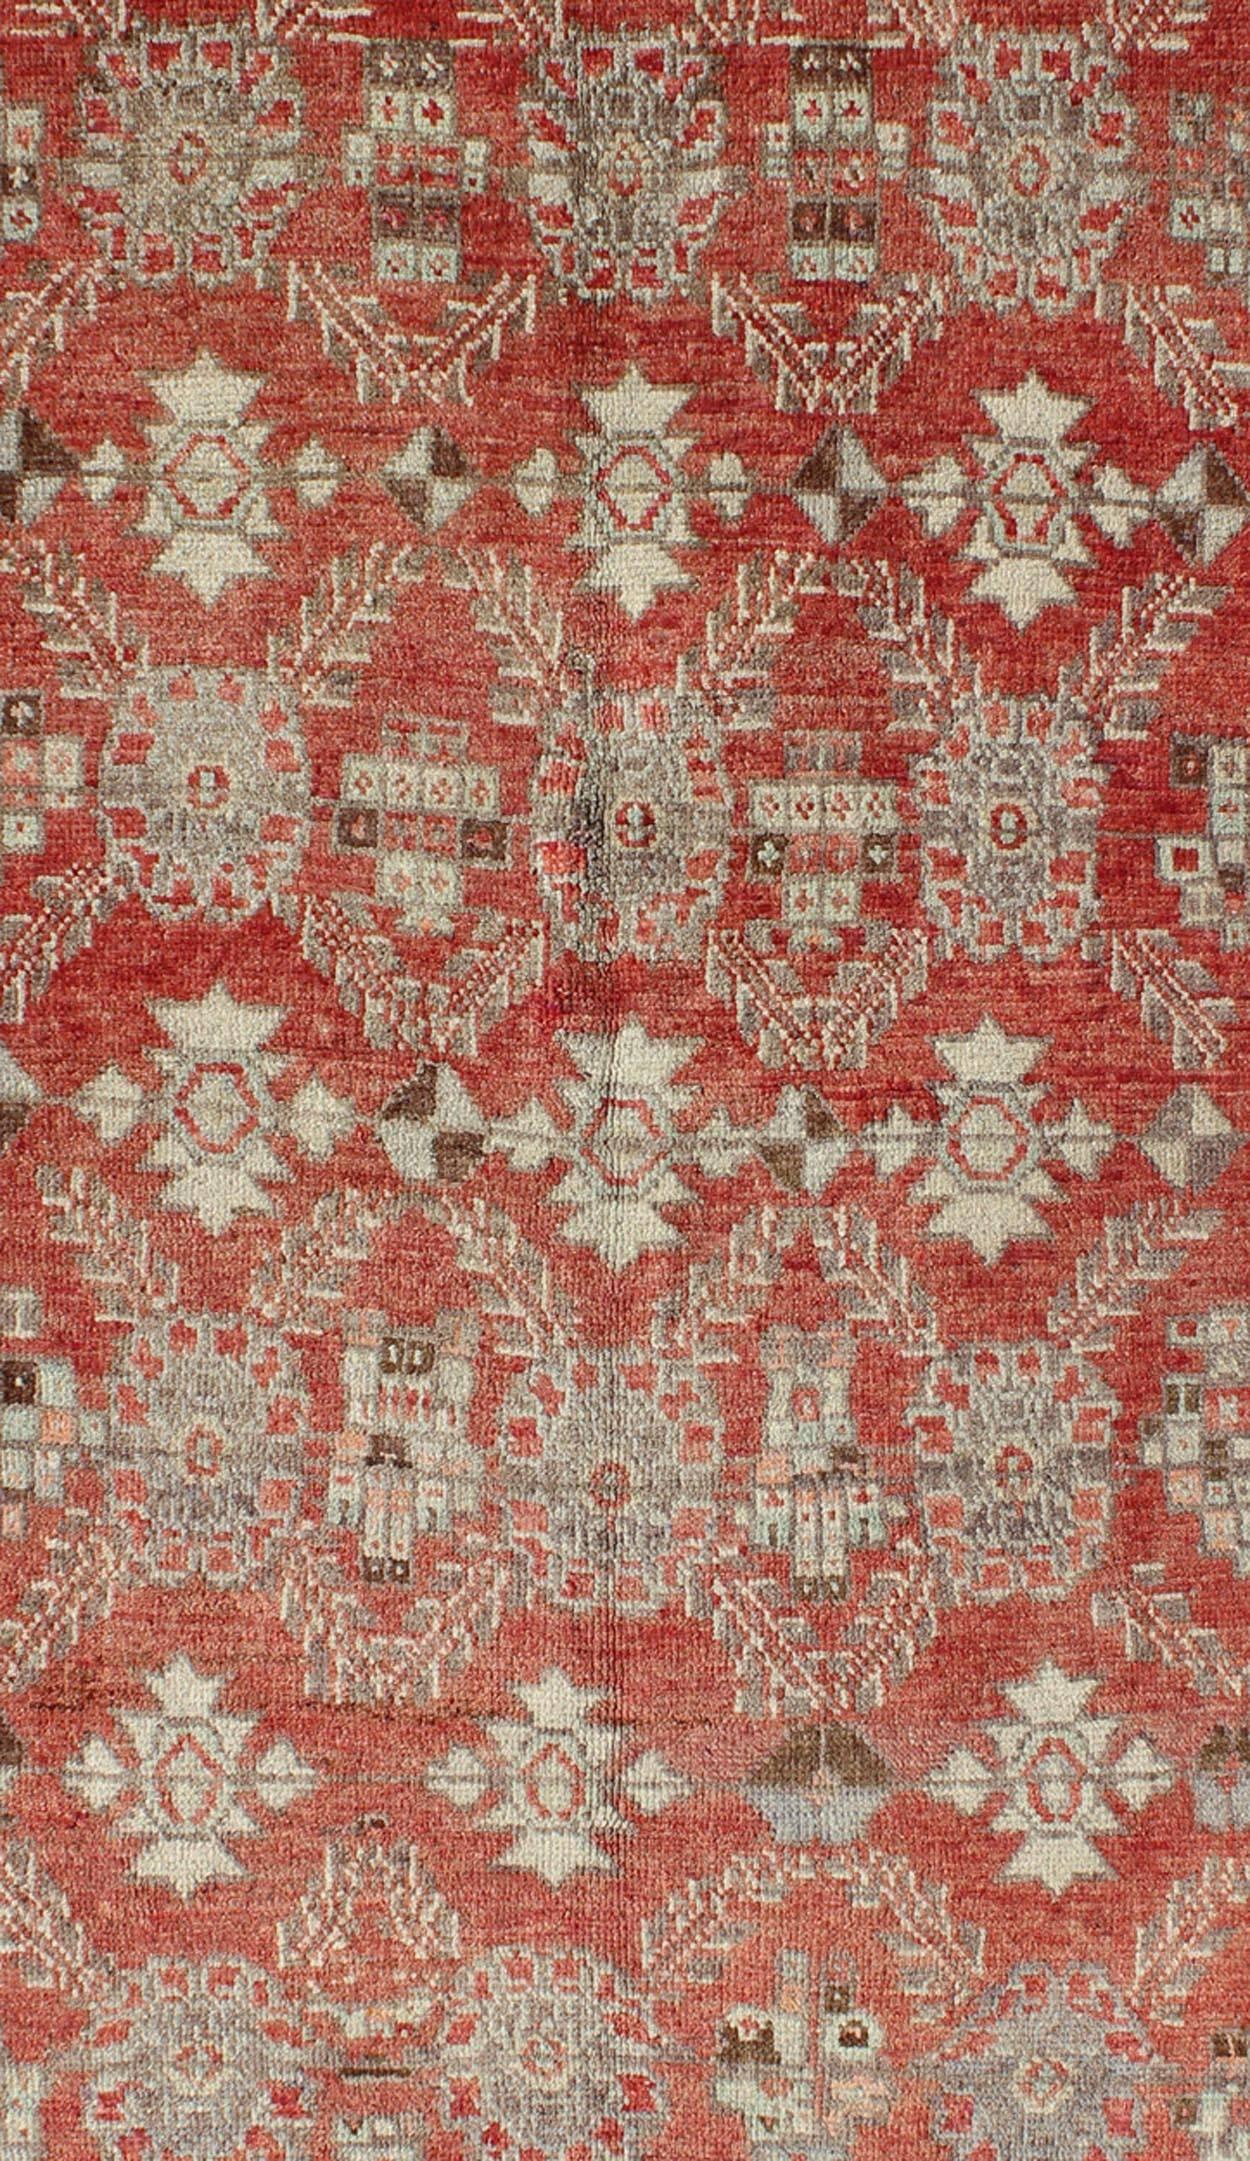 Turkish Oushak Rug With Interconnected Floral Designs in Red, Brown & Light Green For Sale